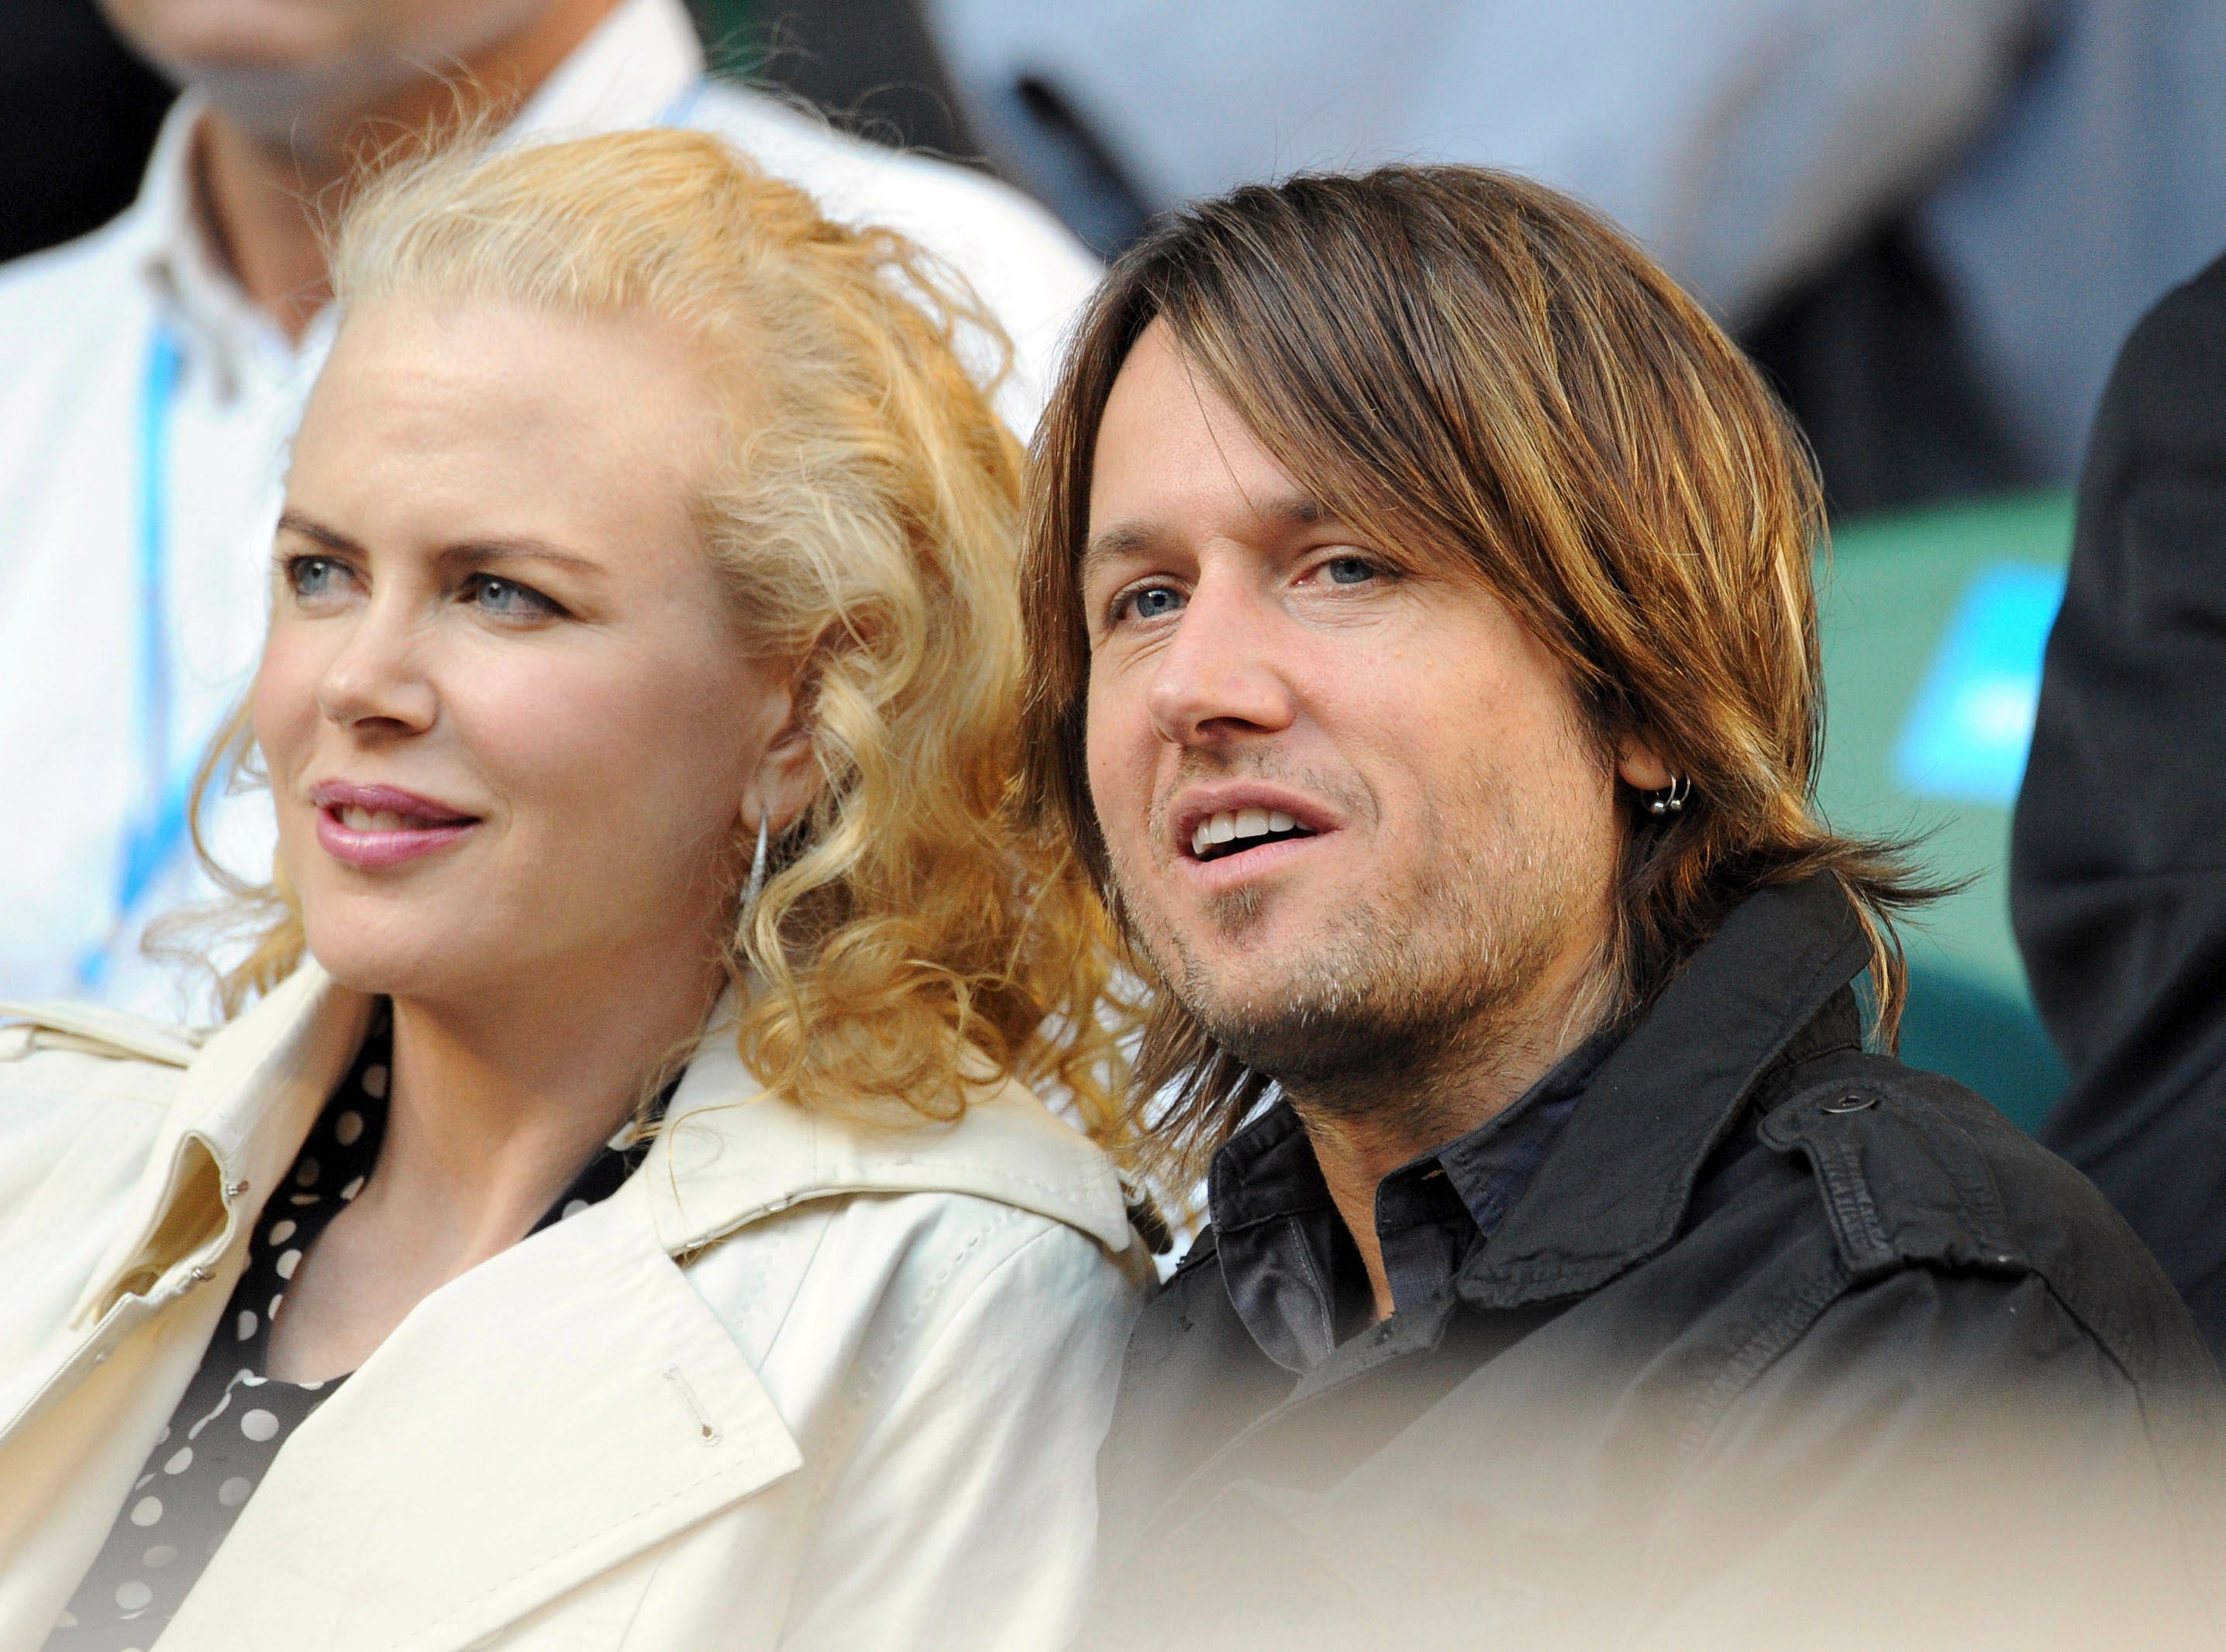 Nicole Kidman and Keith Urban during the Australian Open at Melbourne Park on January 21, 2008 in Melbourne, Australia. | Source: Getty Images